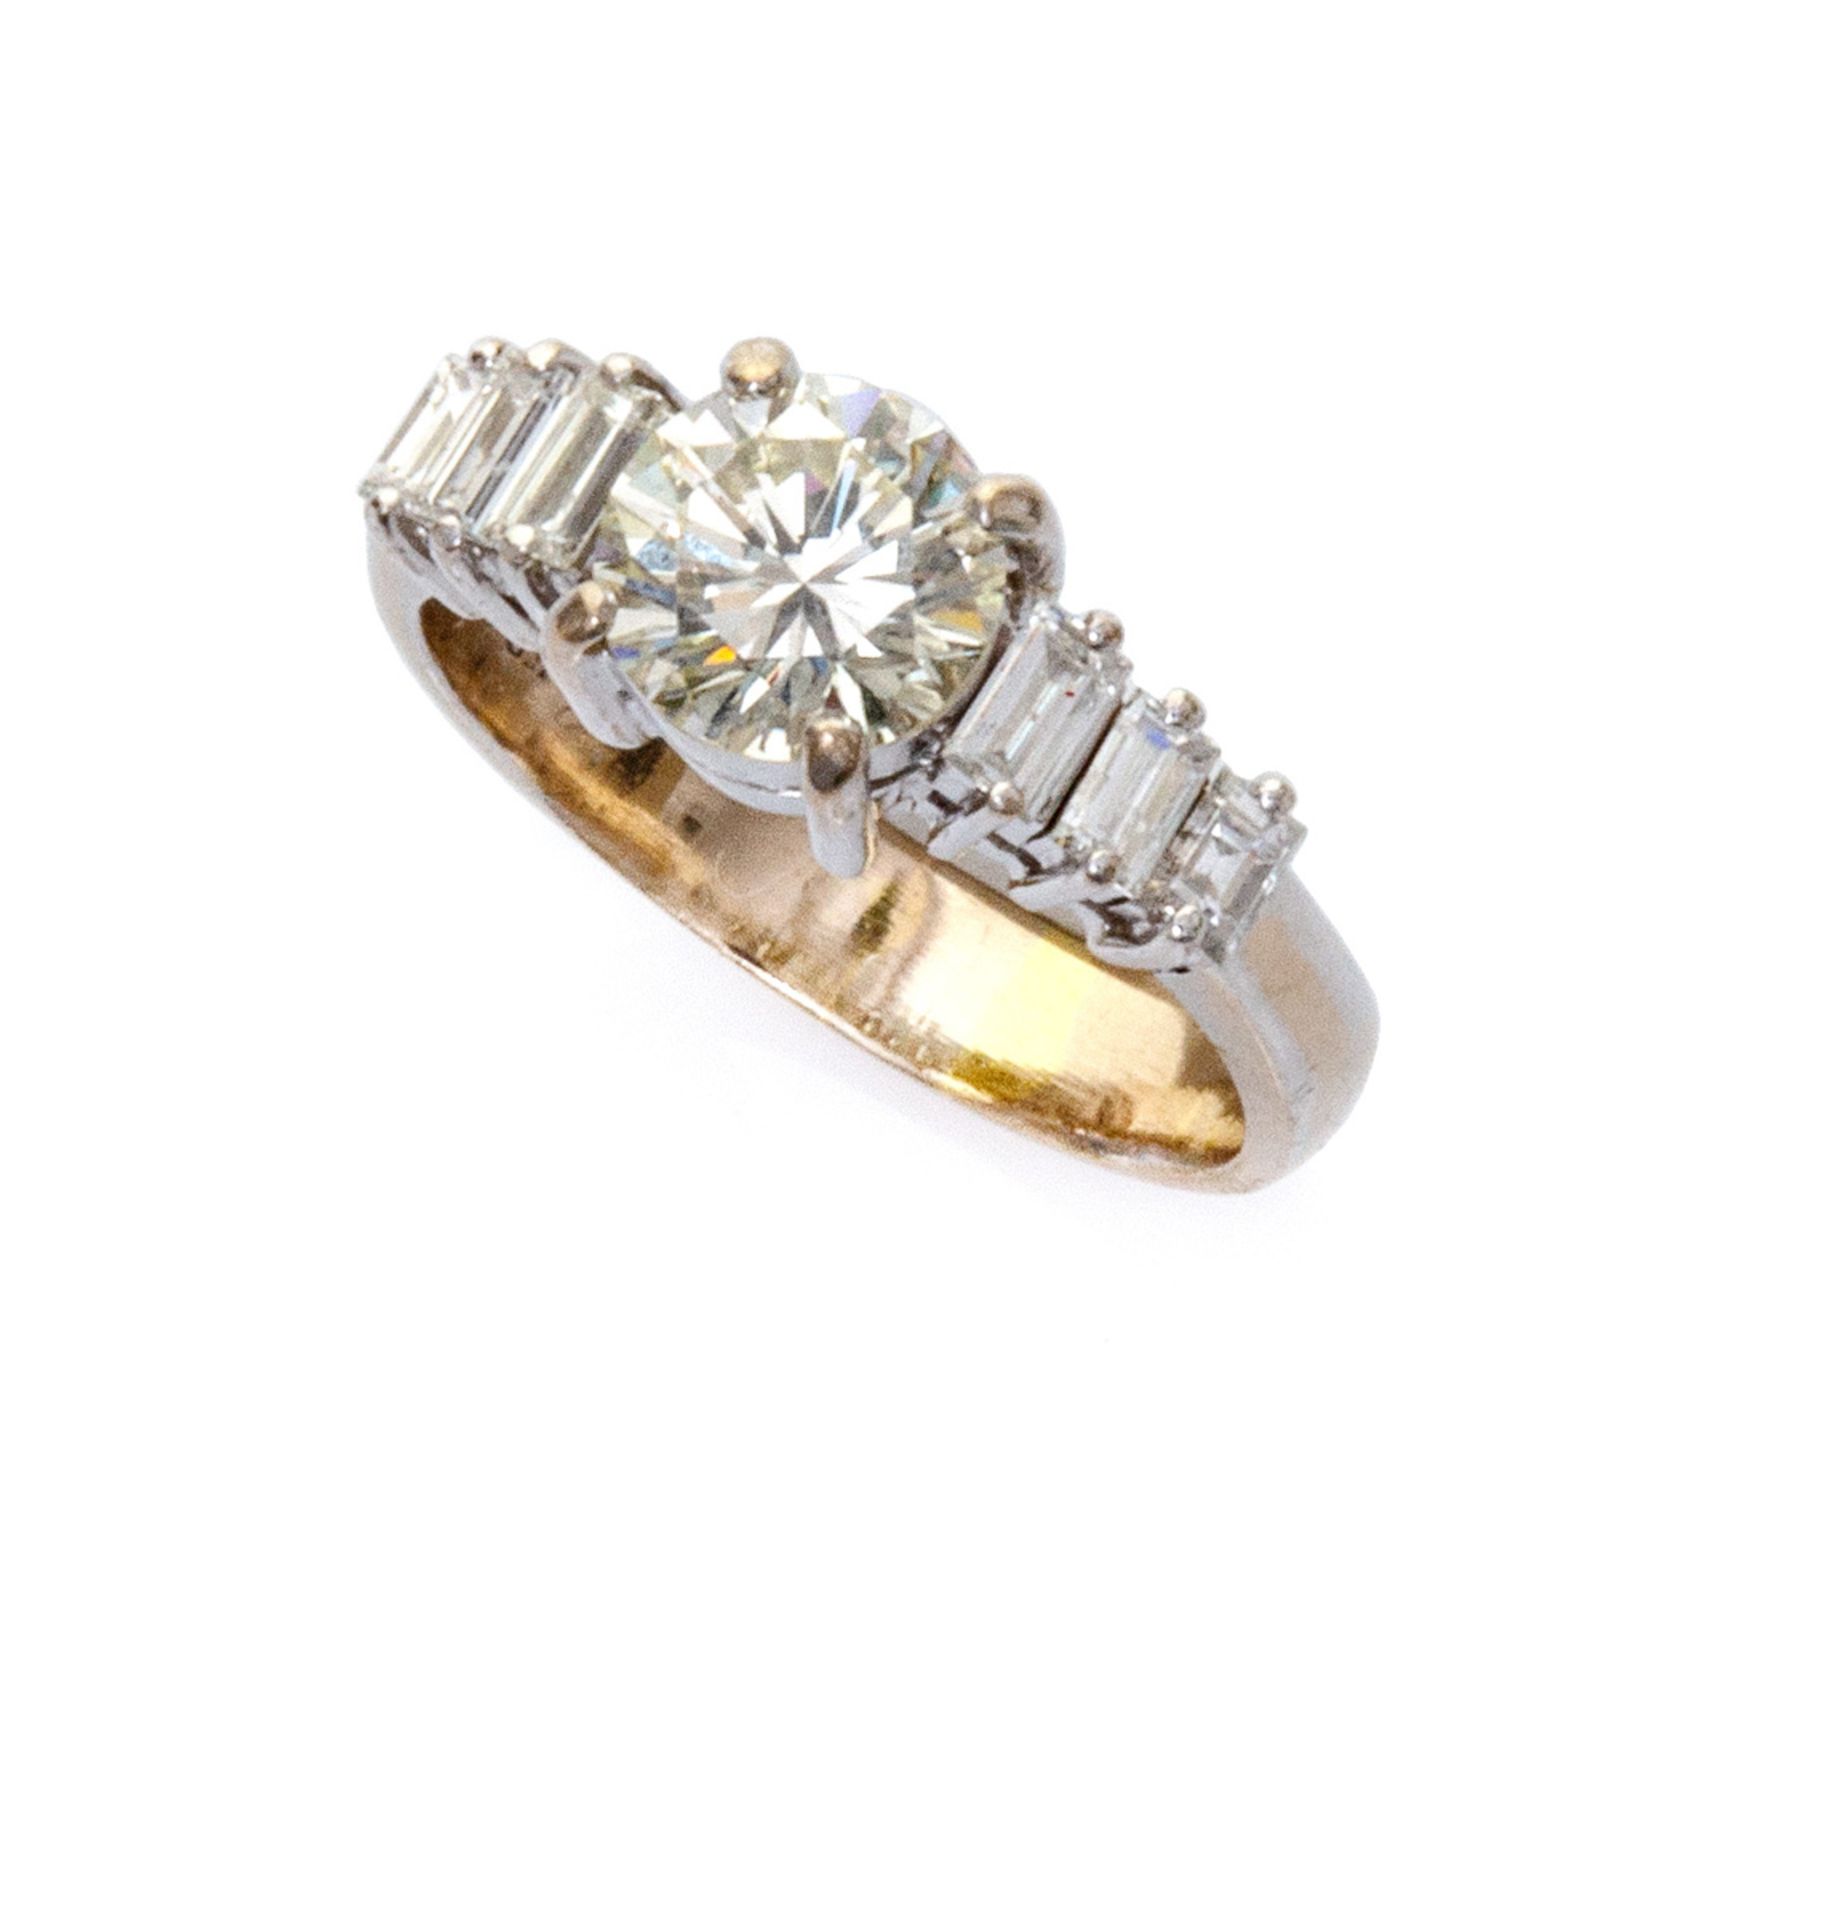 SPLENDID RING in white gold 18 kts., embellished with central brilliant cut diamond and contour of